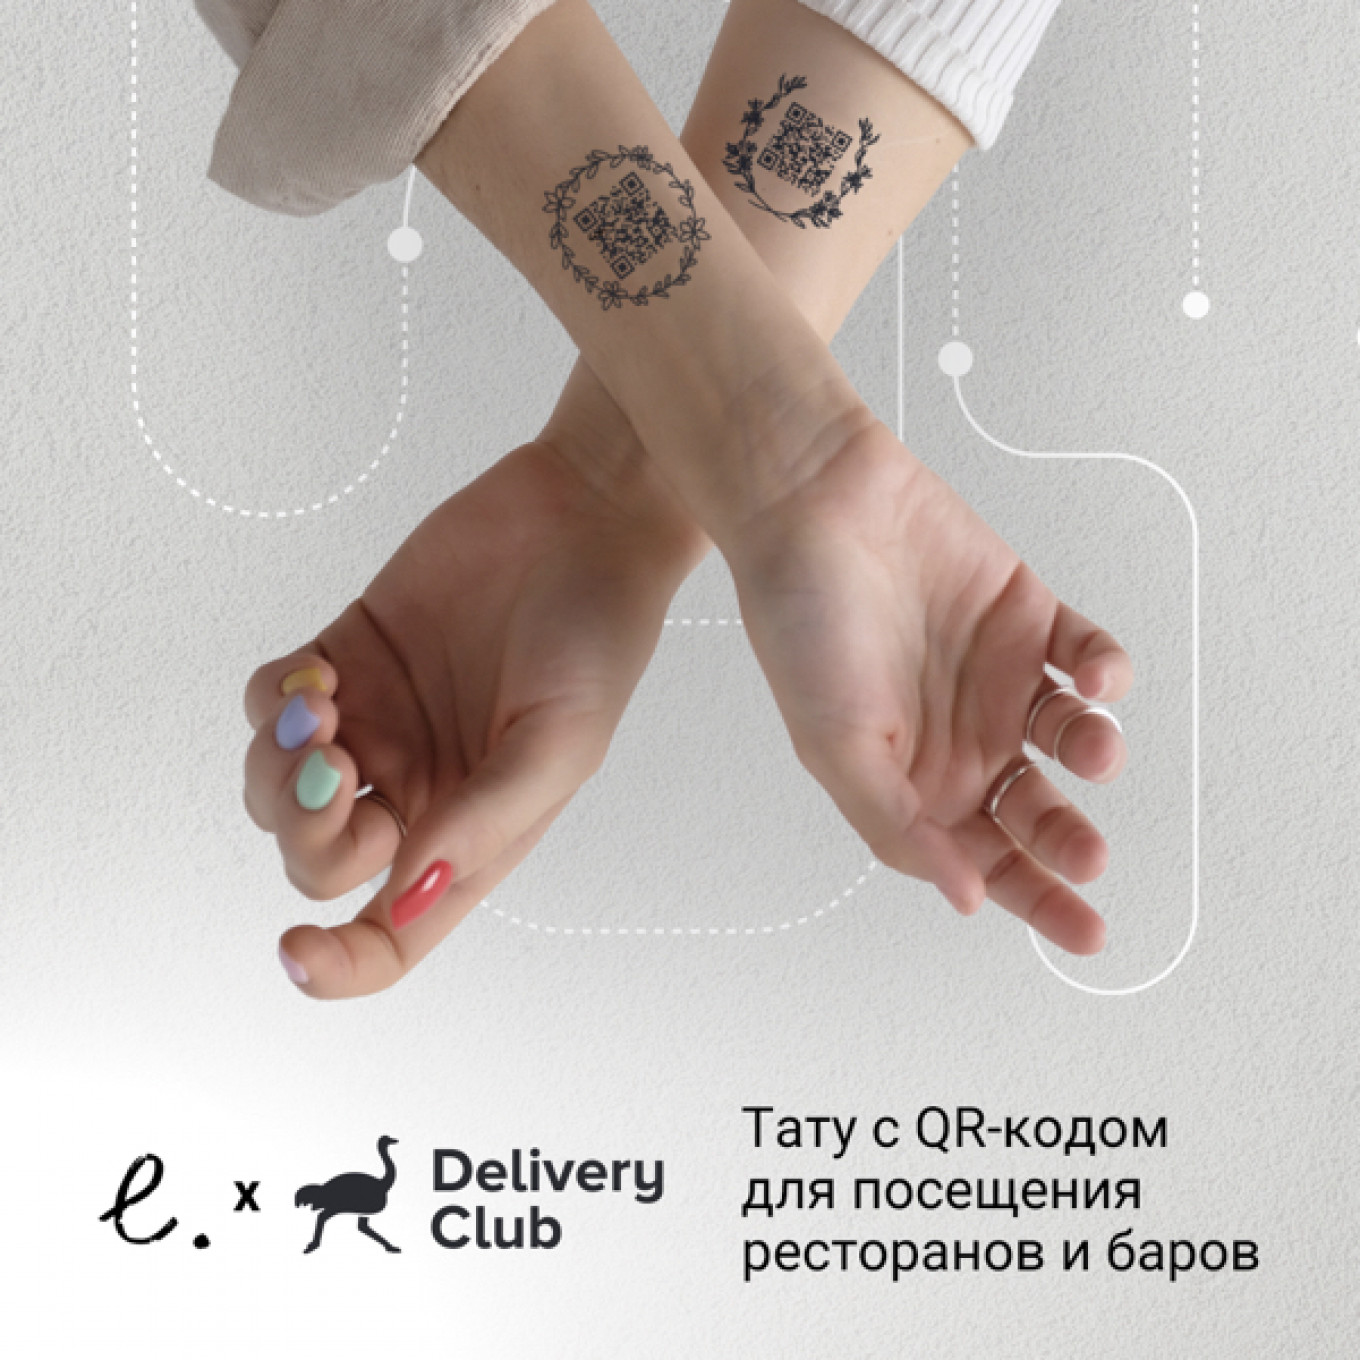 Moscow's QR Code Passes Get the Tattoo Treatment - The Moscow Times